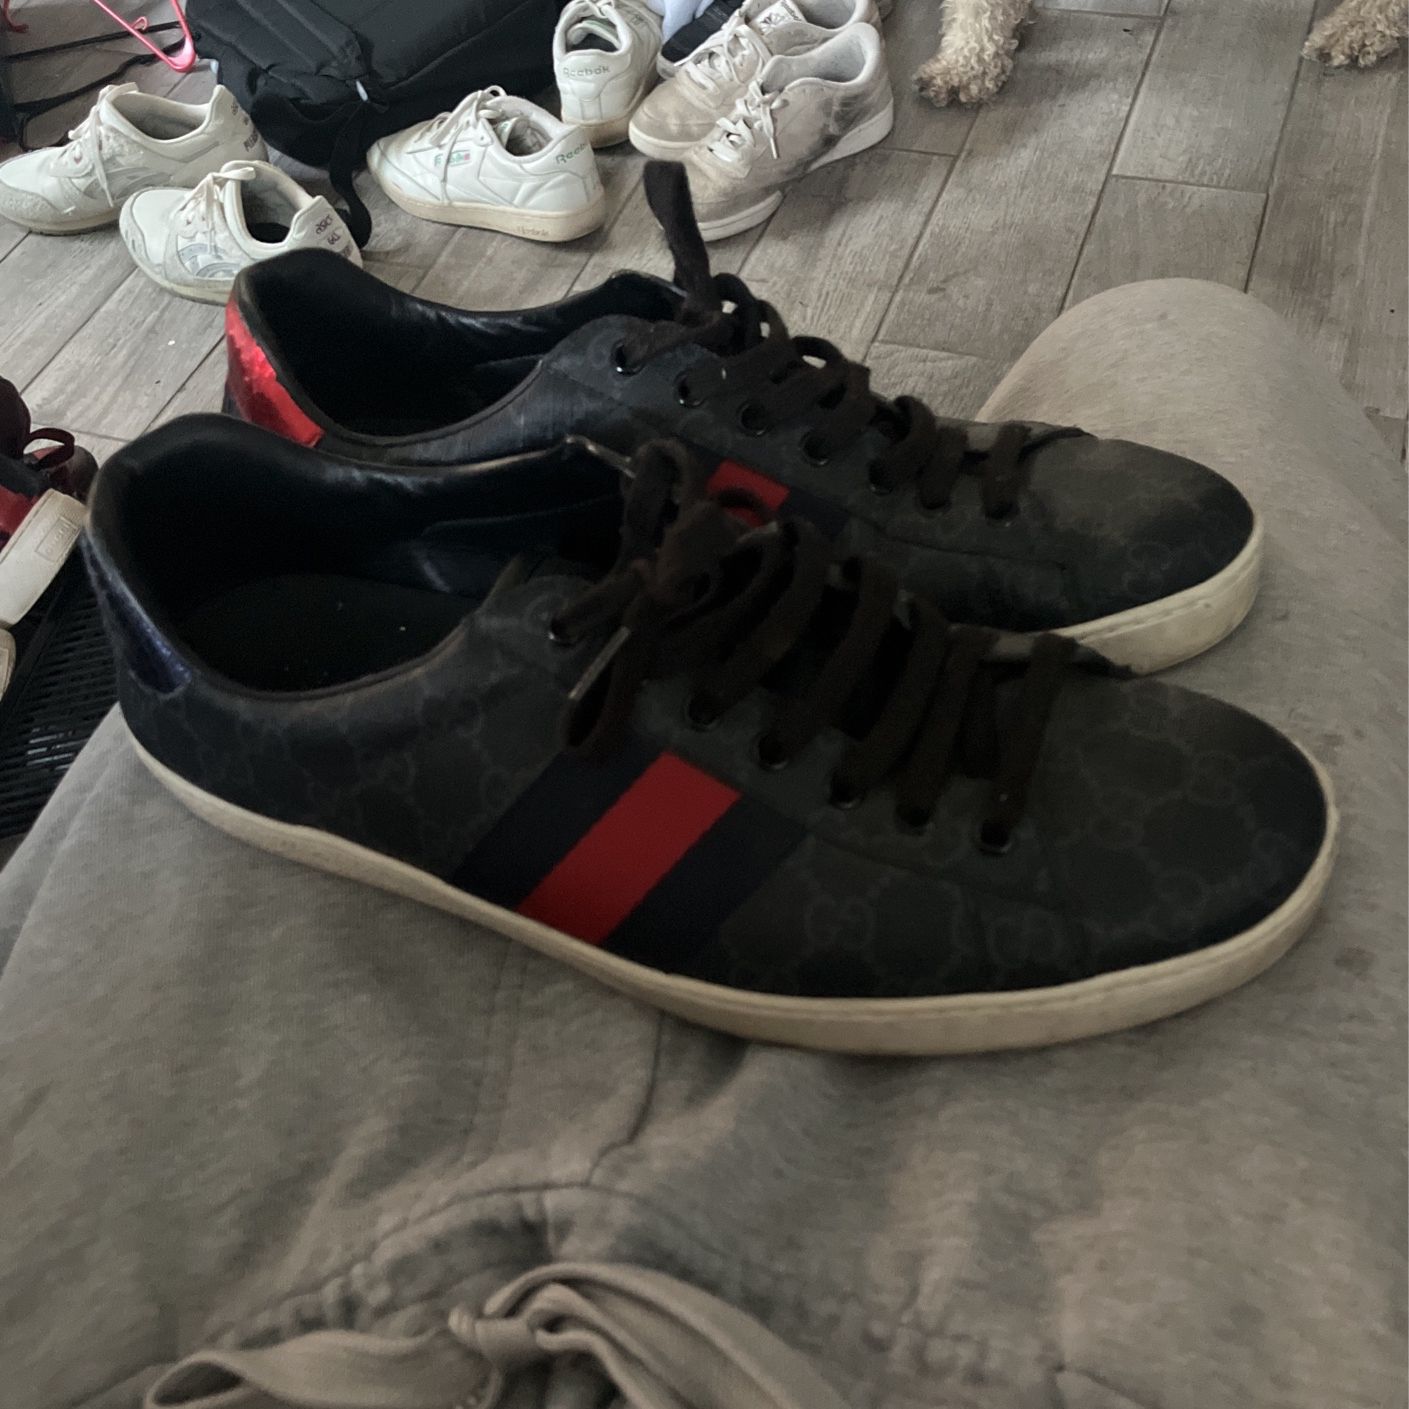 Gucci Ace Sneakers Size 9 1/2 